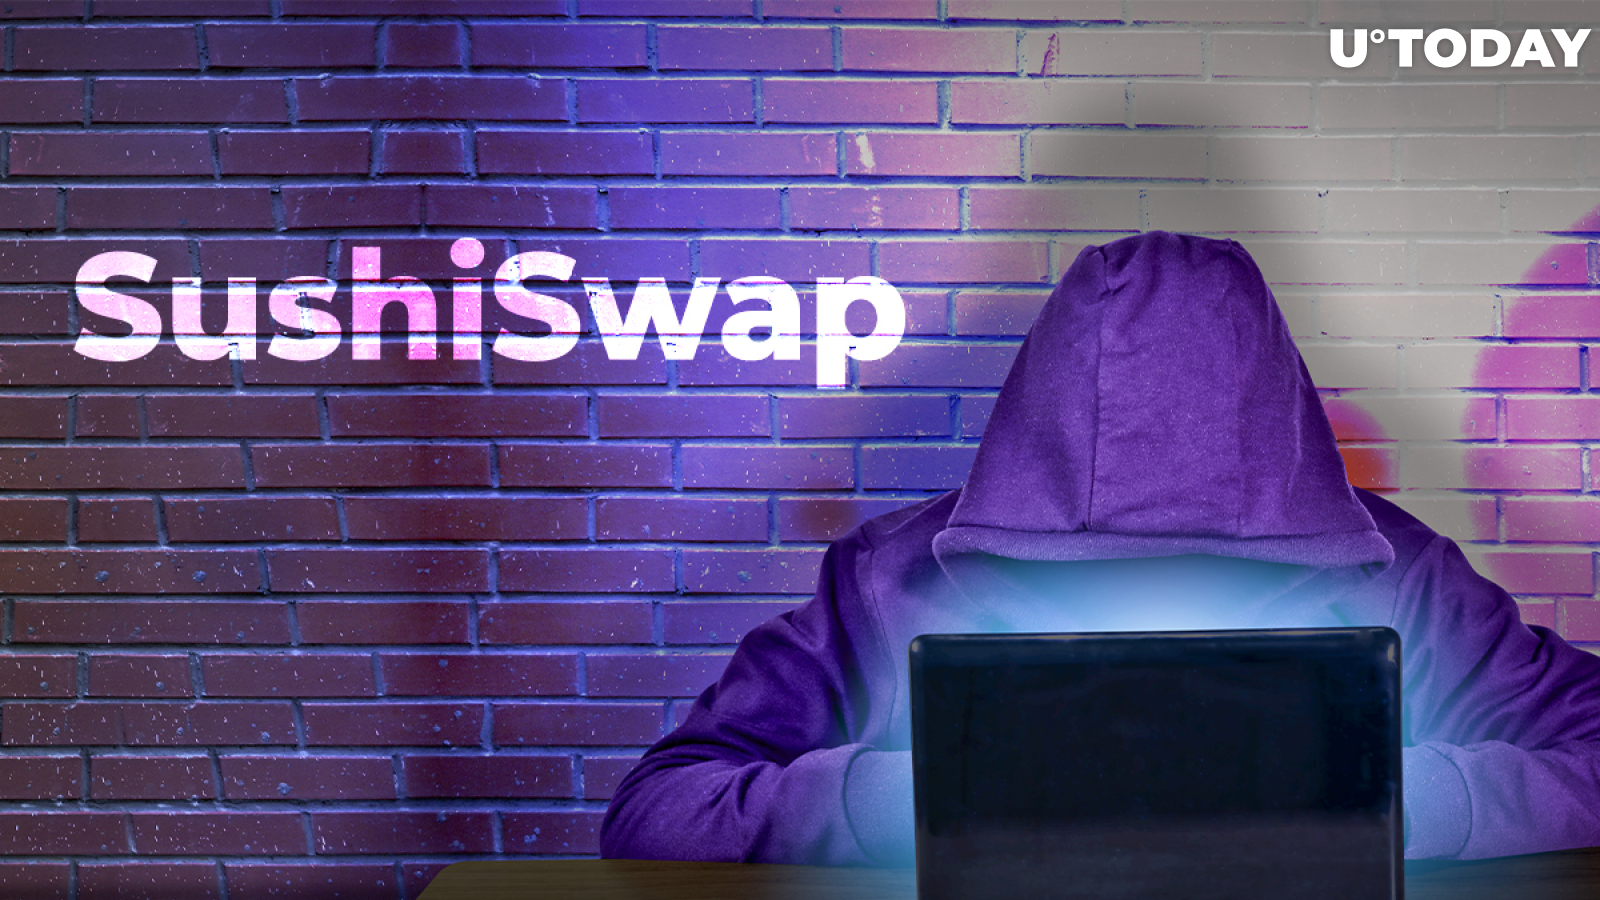 $350 Million SushiSwap Hack Just Prevented by Anonymous Dev: Details